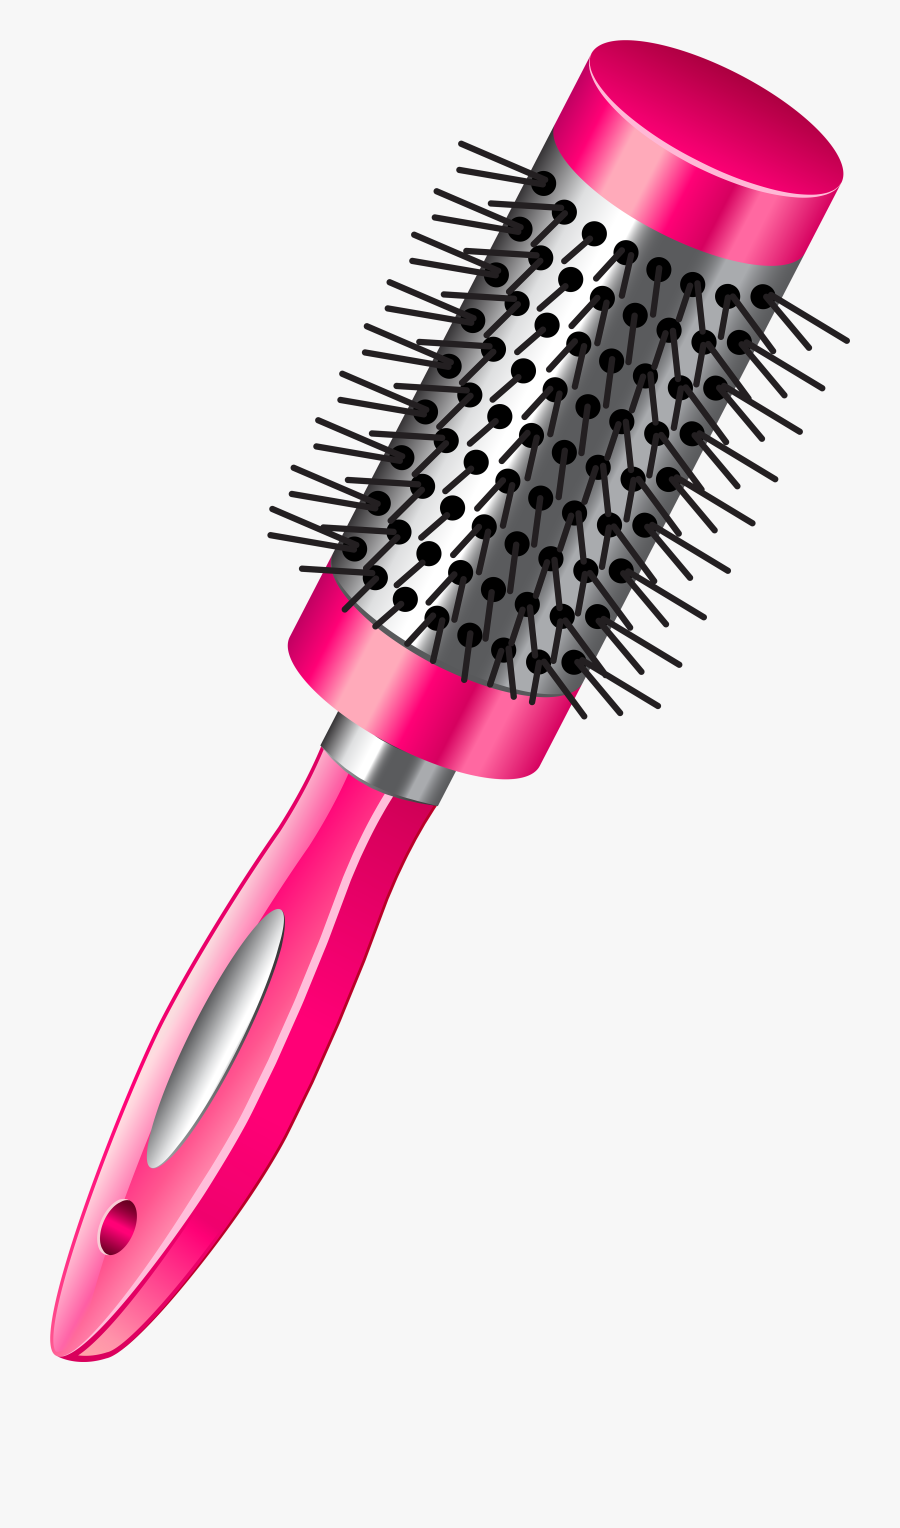 Collection Of Hair - Transparent Background Hair Brush Png, Transparent Clipart